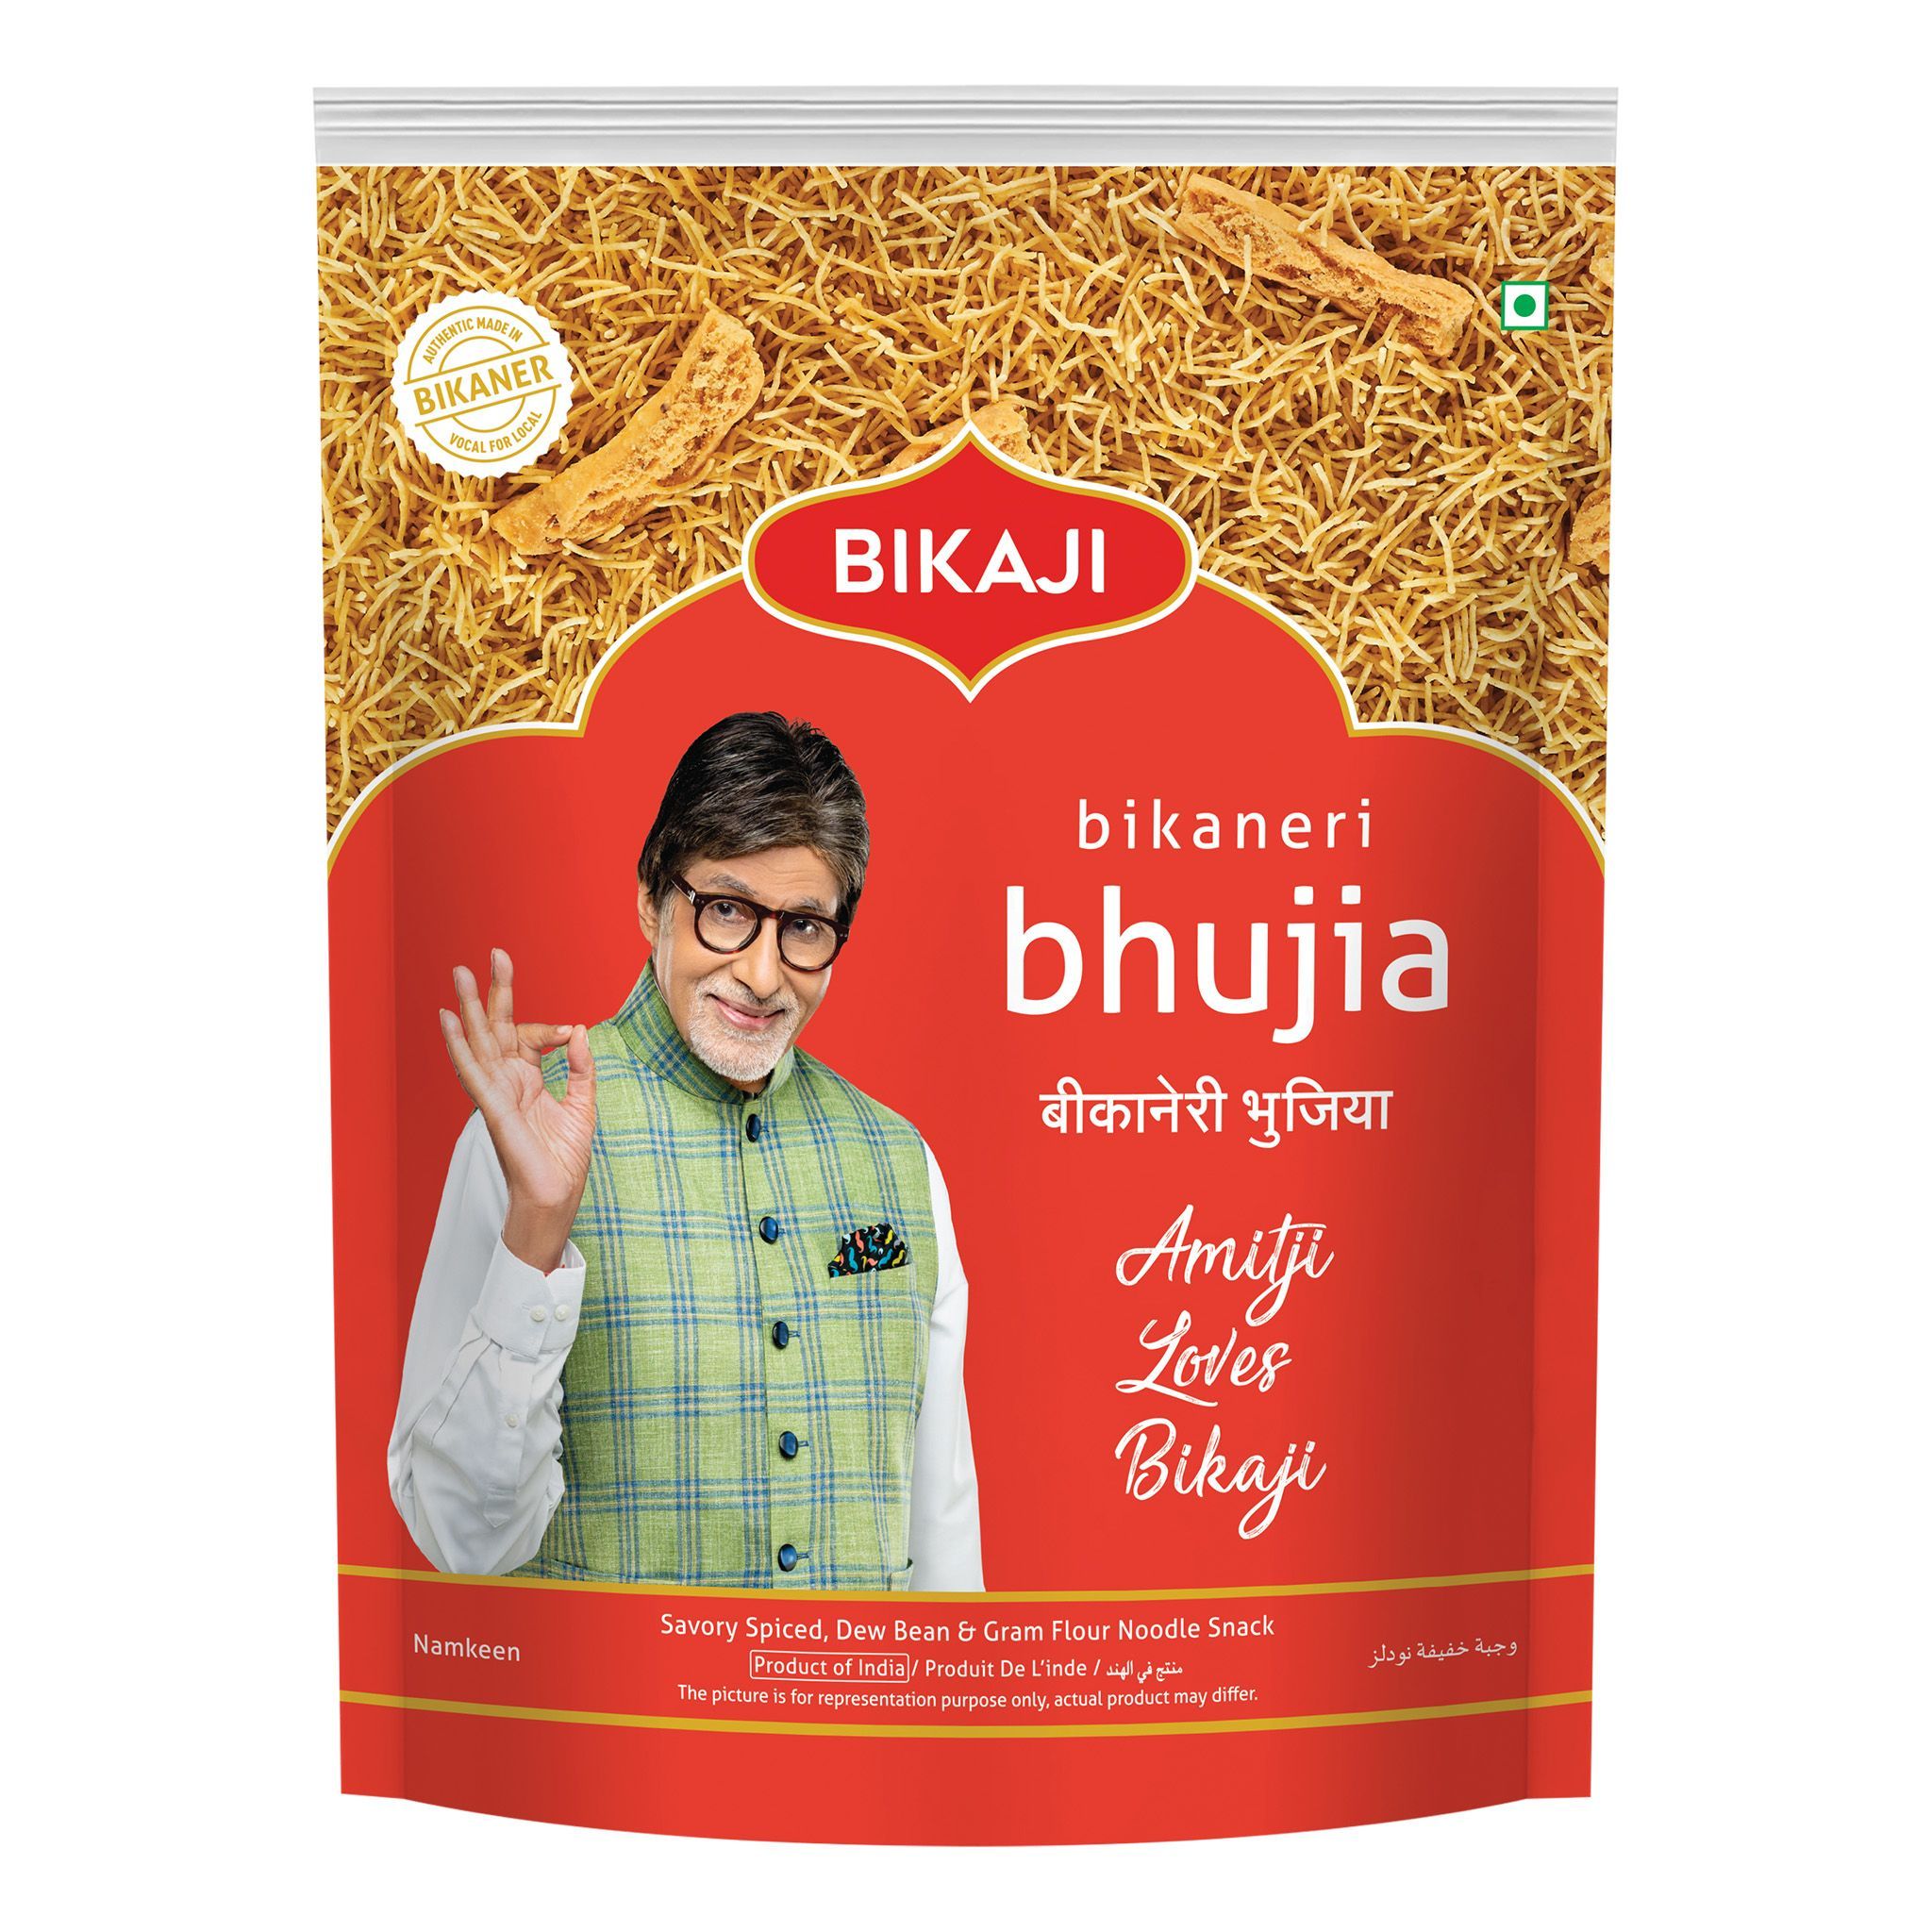 Bikaji - Send your love to your sibling with Bikaji and enjoy a flat 15%  discount. We'll also include a rakhi in the box to complete your  celebrations. Visit the link in